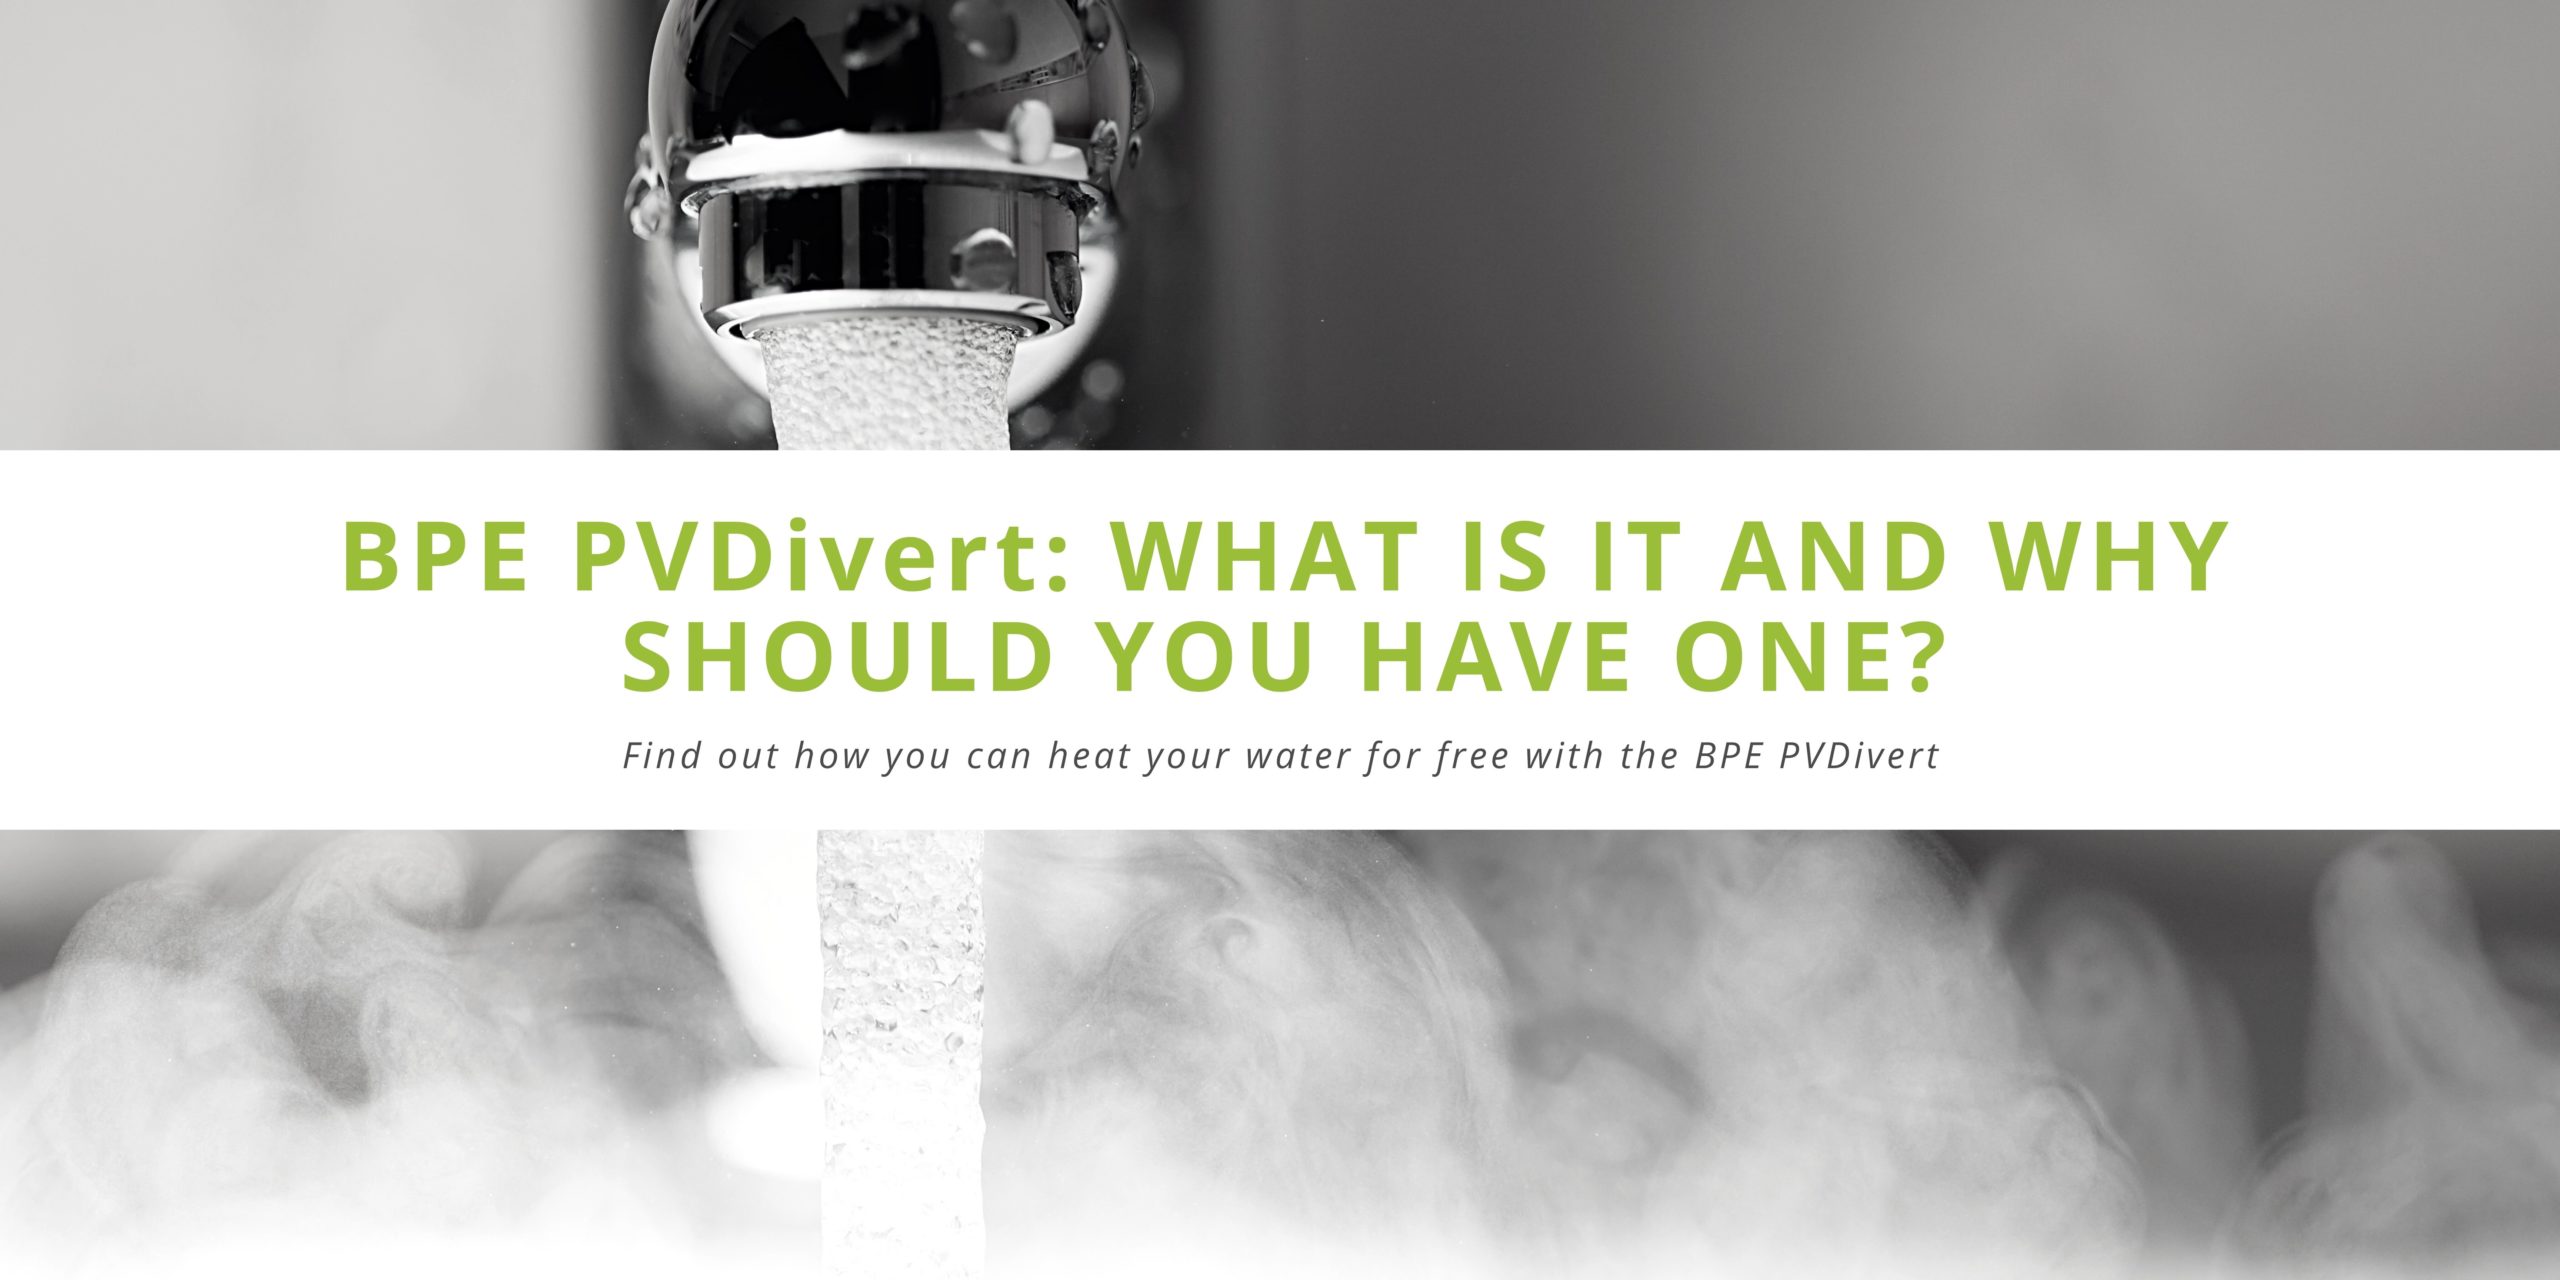 BPE PVDivert: What is it and why should you have one? blog banner